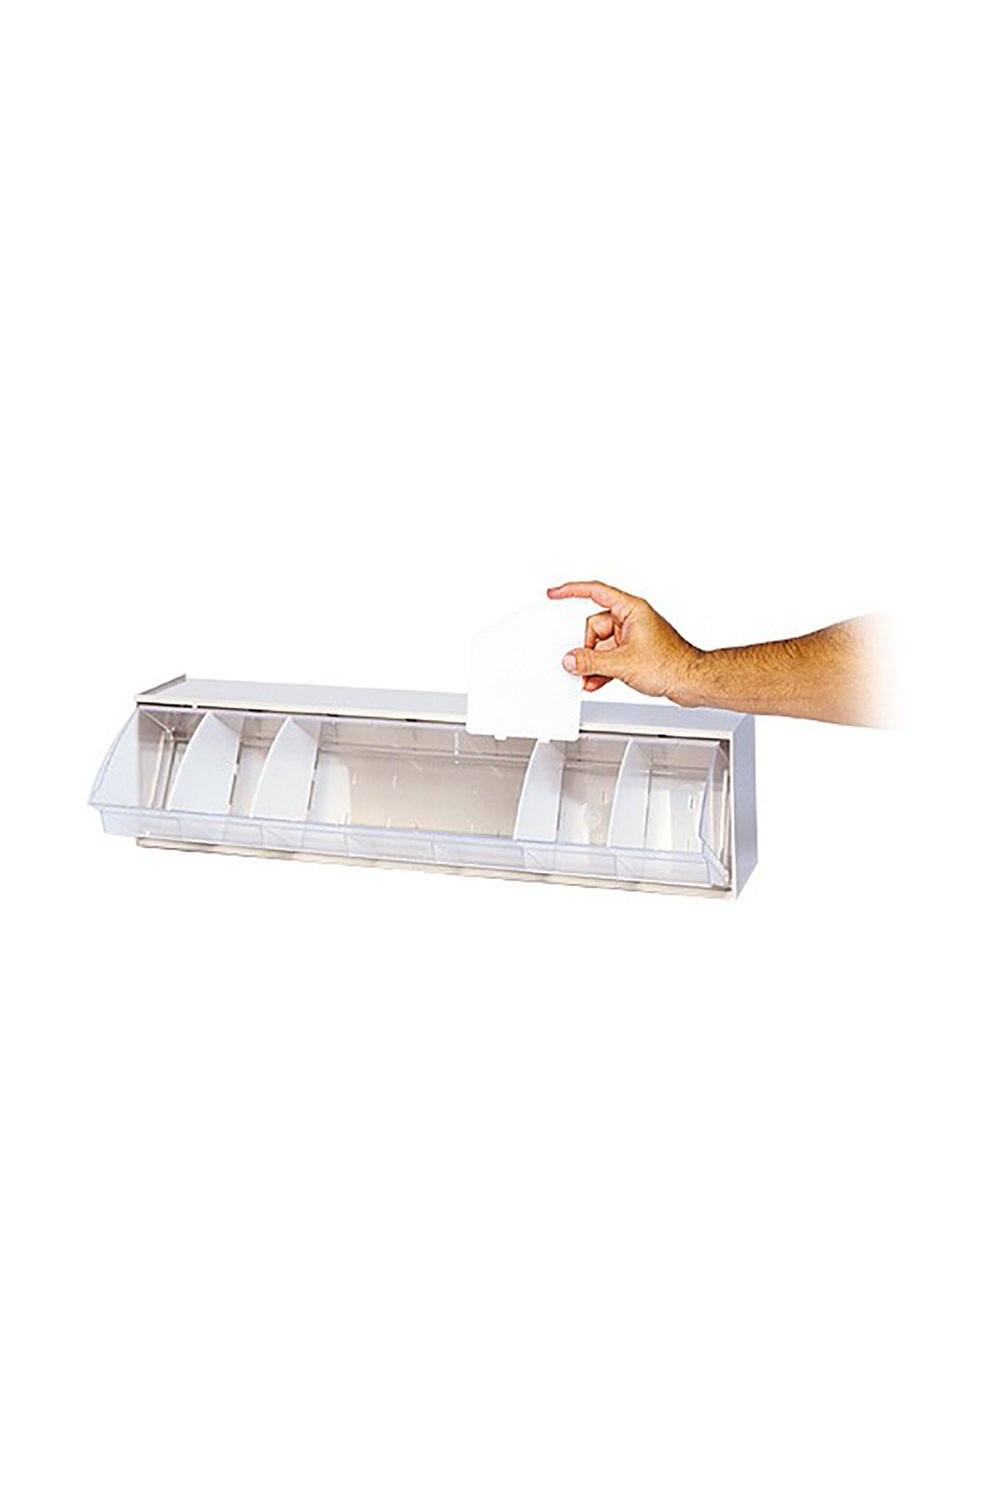 Dividable Tip Out Bin Divider Bins & Containers Acart 